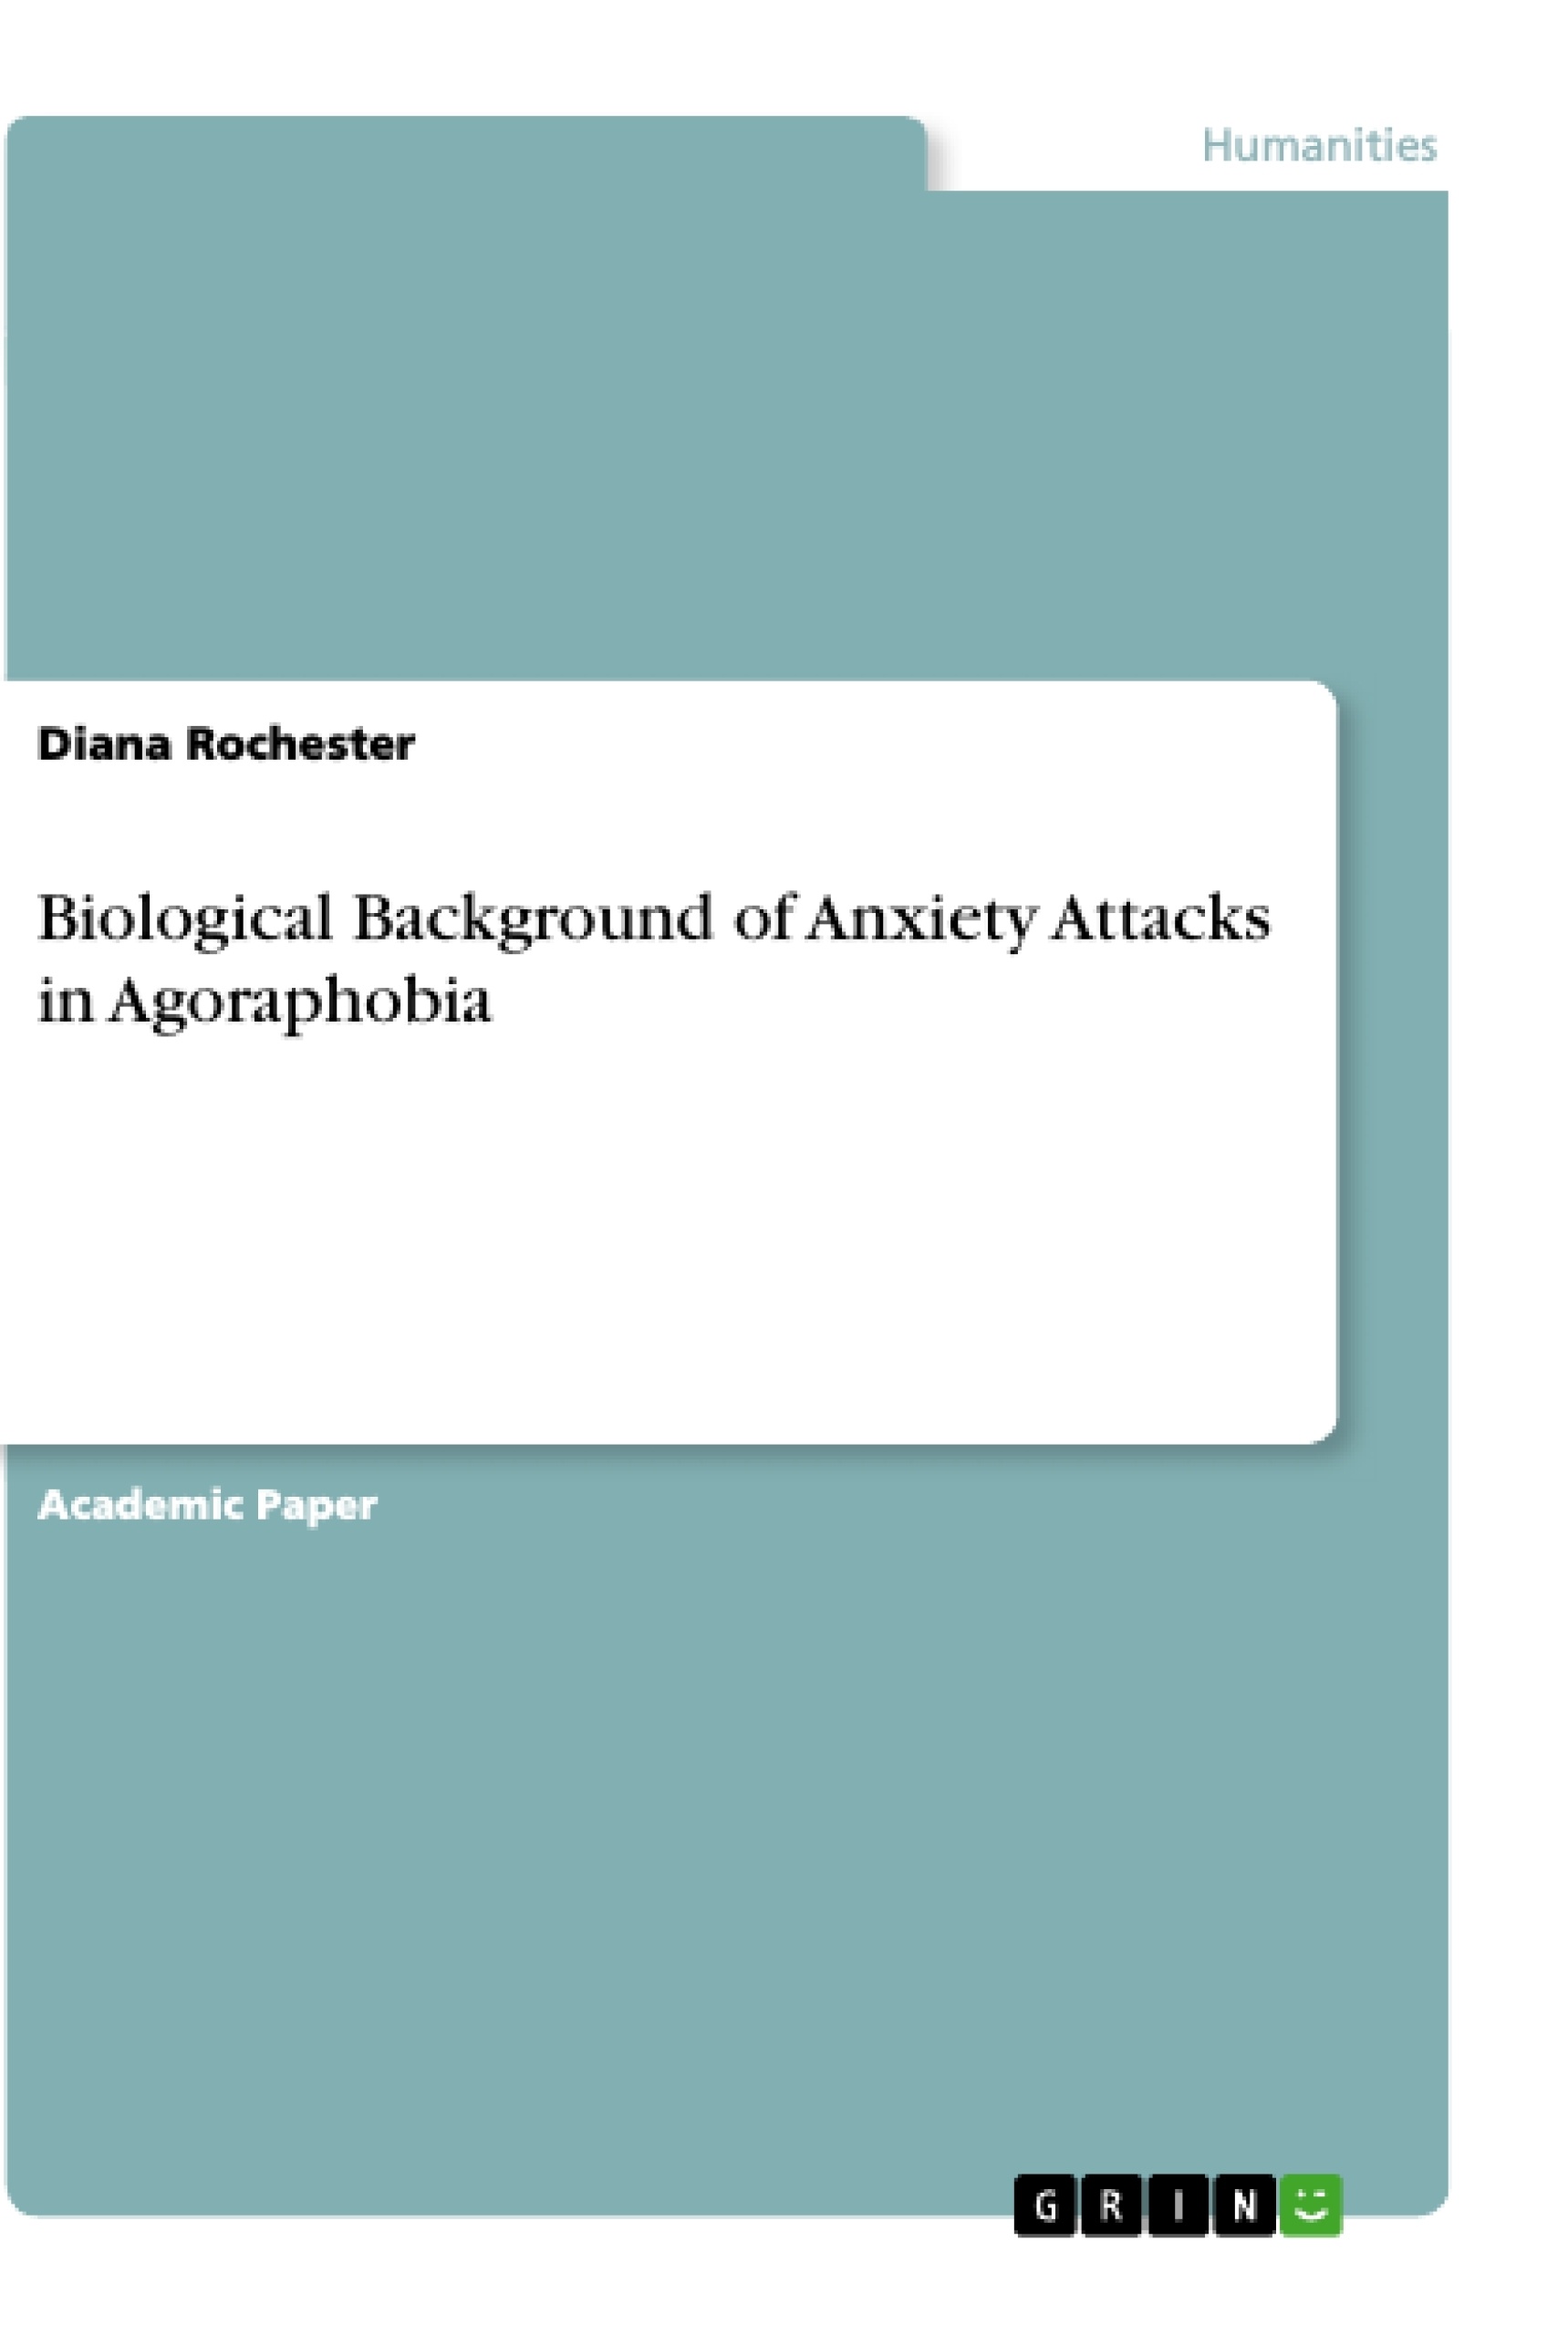 Titre: Biological Background of Anxiety Attacks in Agoraphobia